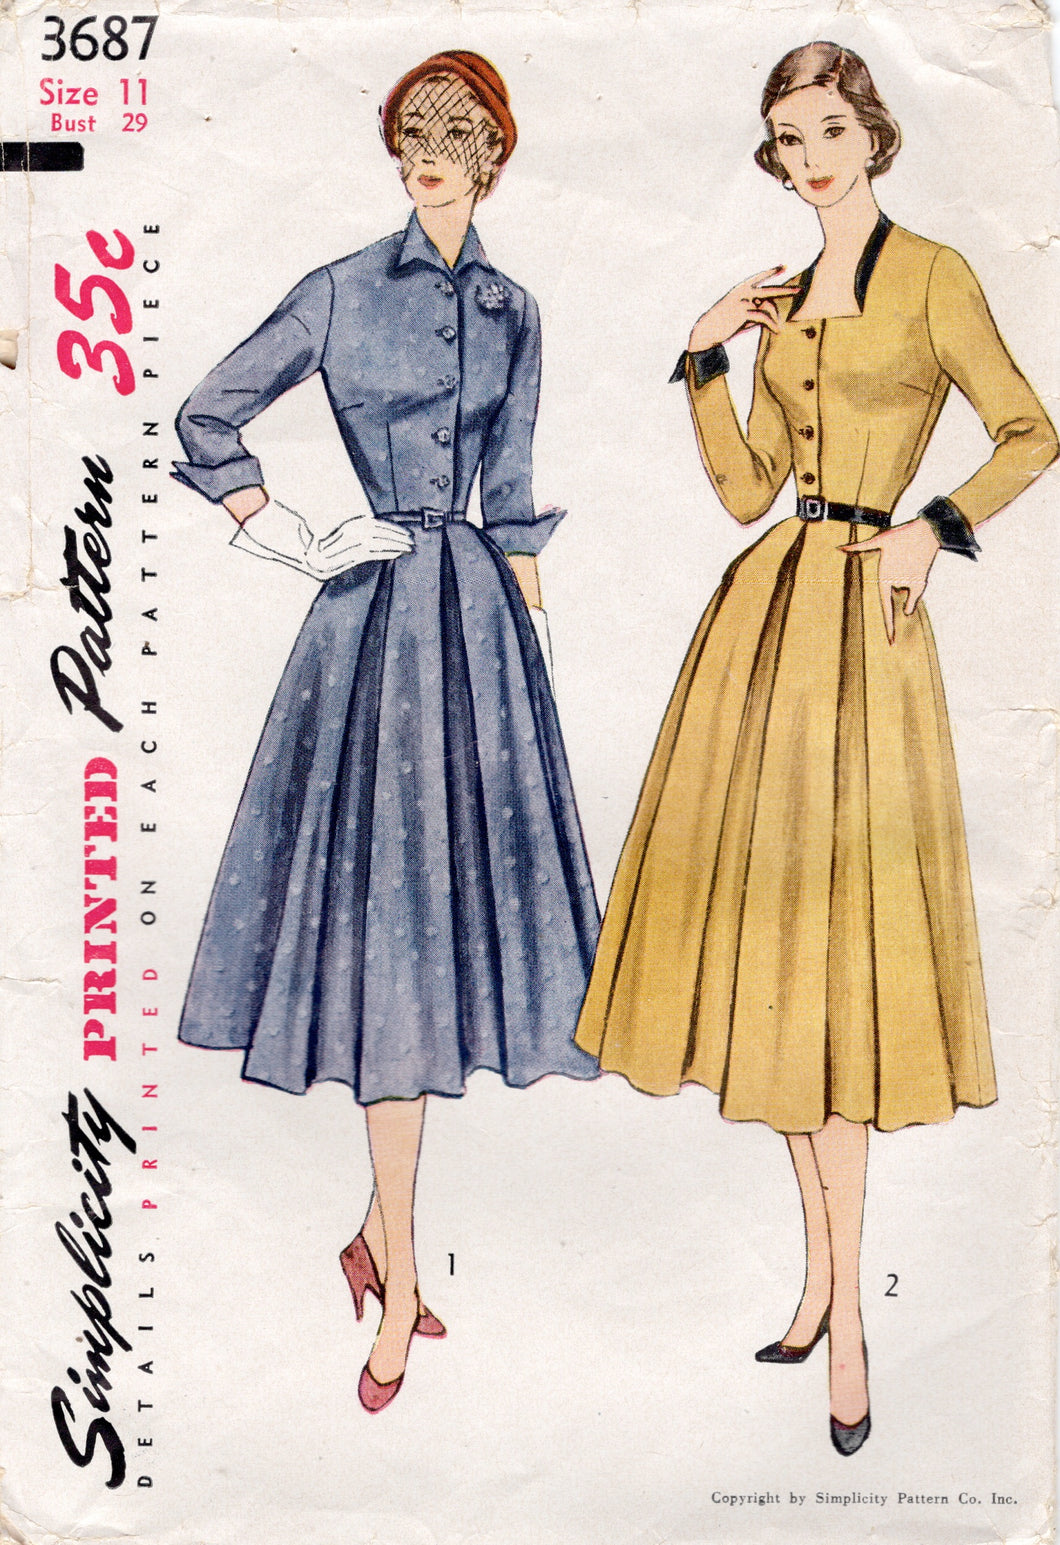 1950's Simplicity Shirtwaist Dress with Inverted pleated Skirt and Optional Cut-away Neckline with Trim - Bust 29